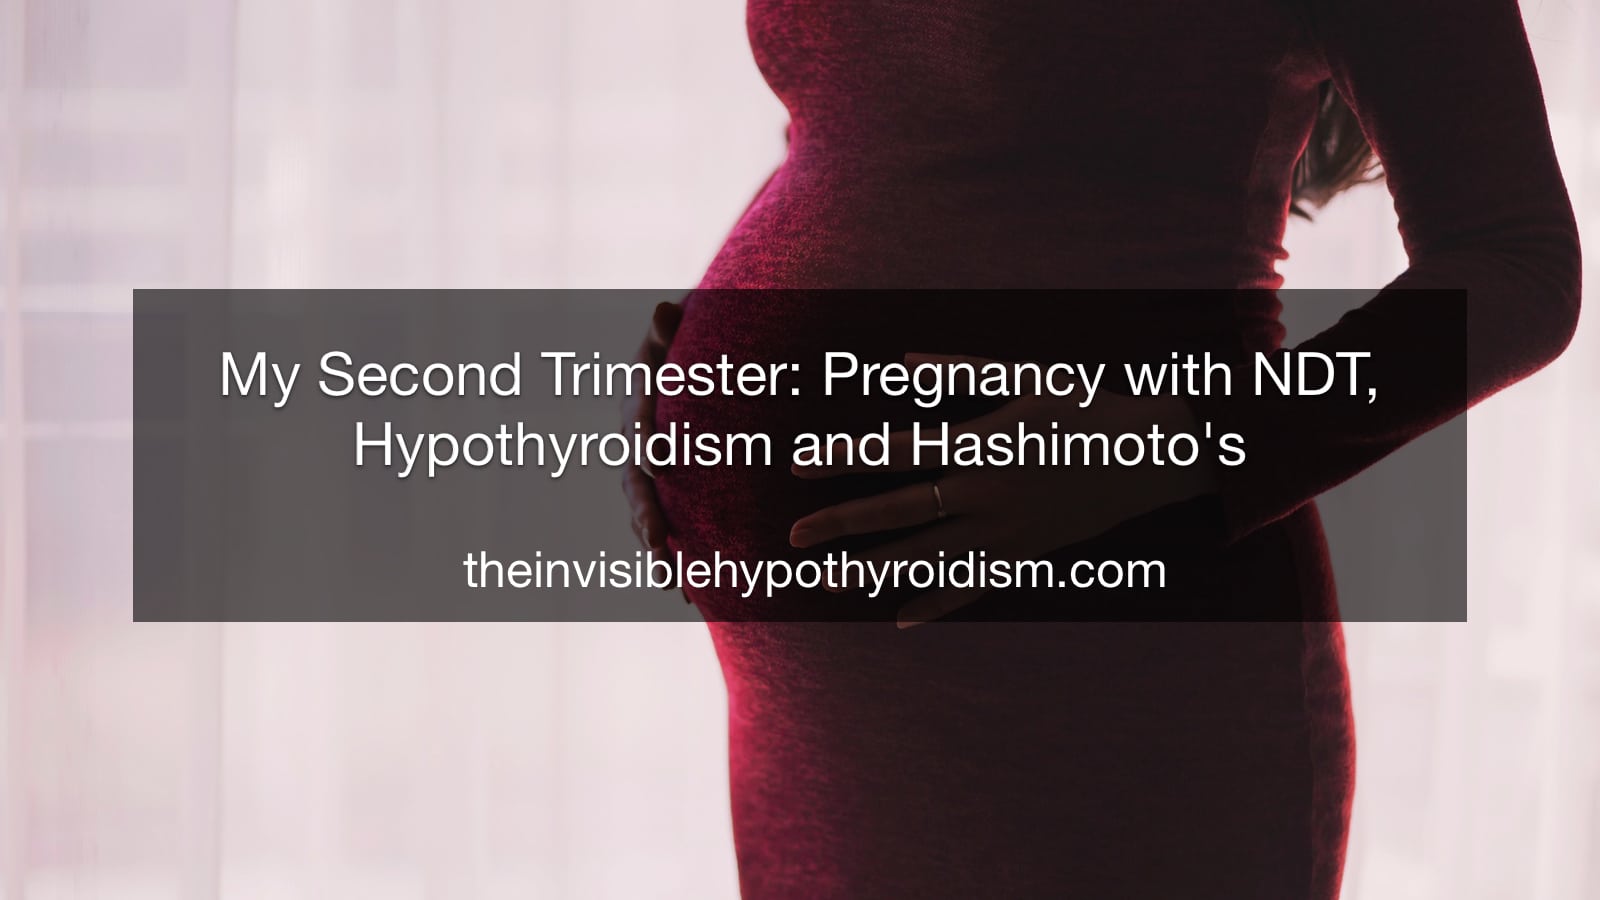 My Second Trimester: Pregnancy with NDT, Hypothyroidism and Hashimoto's